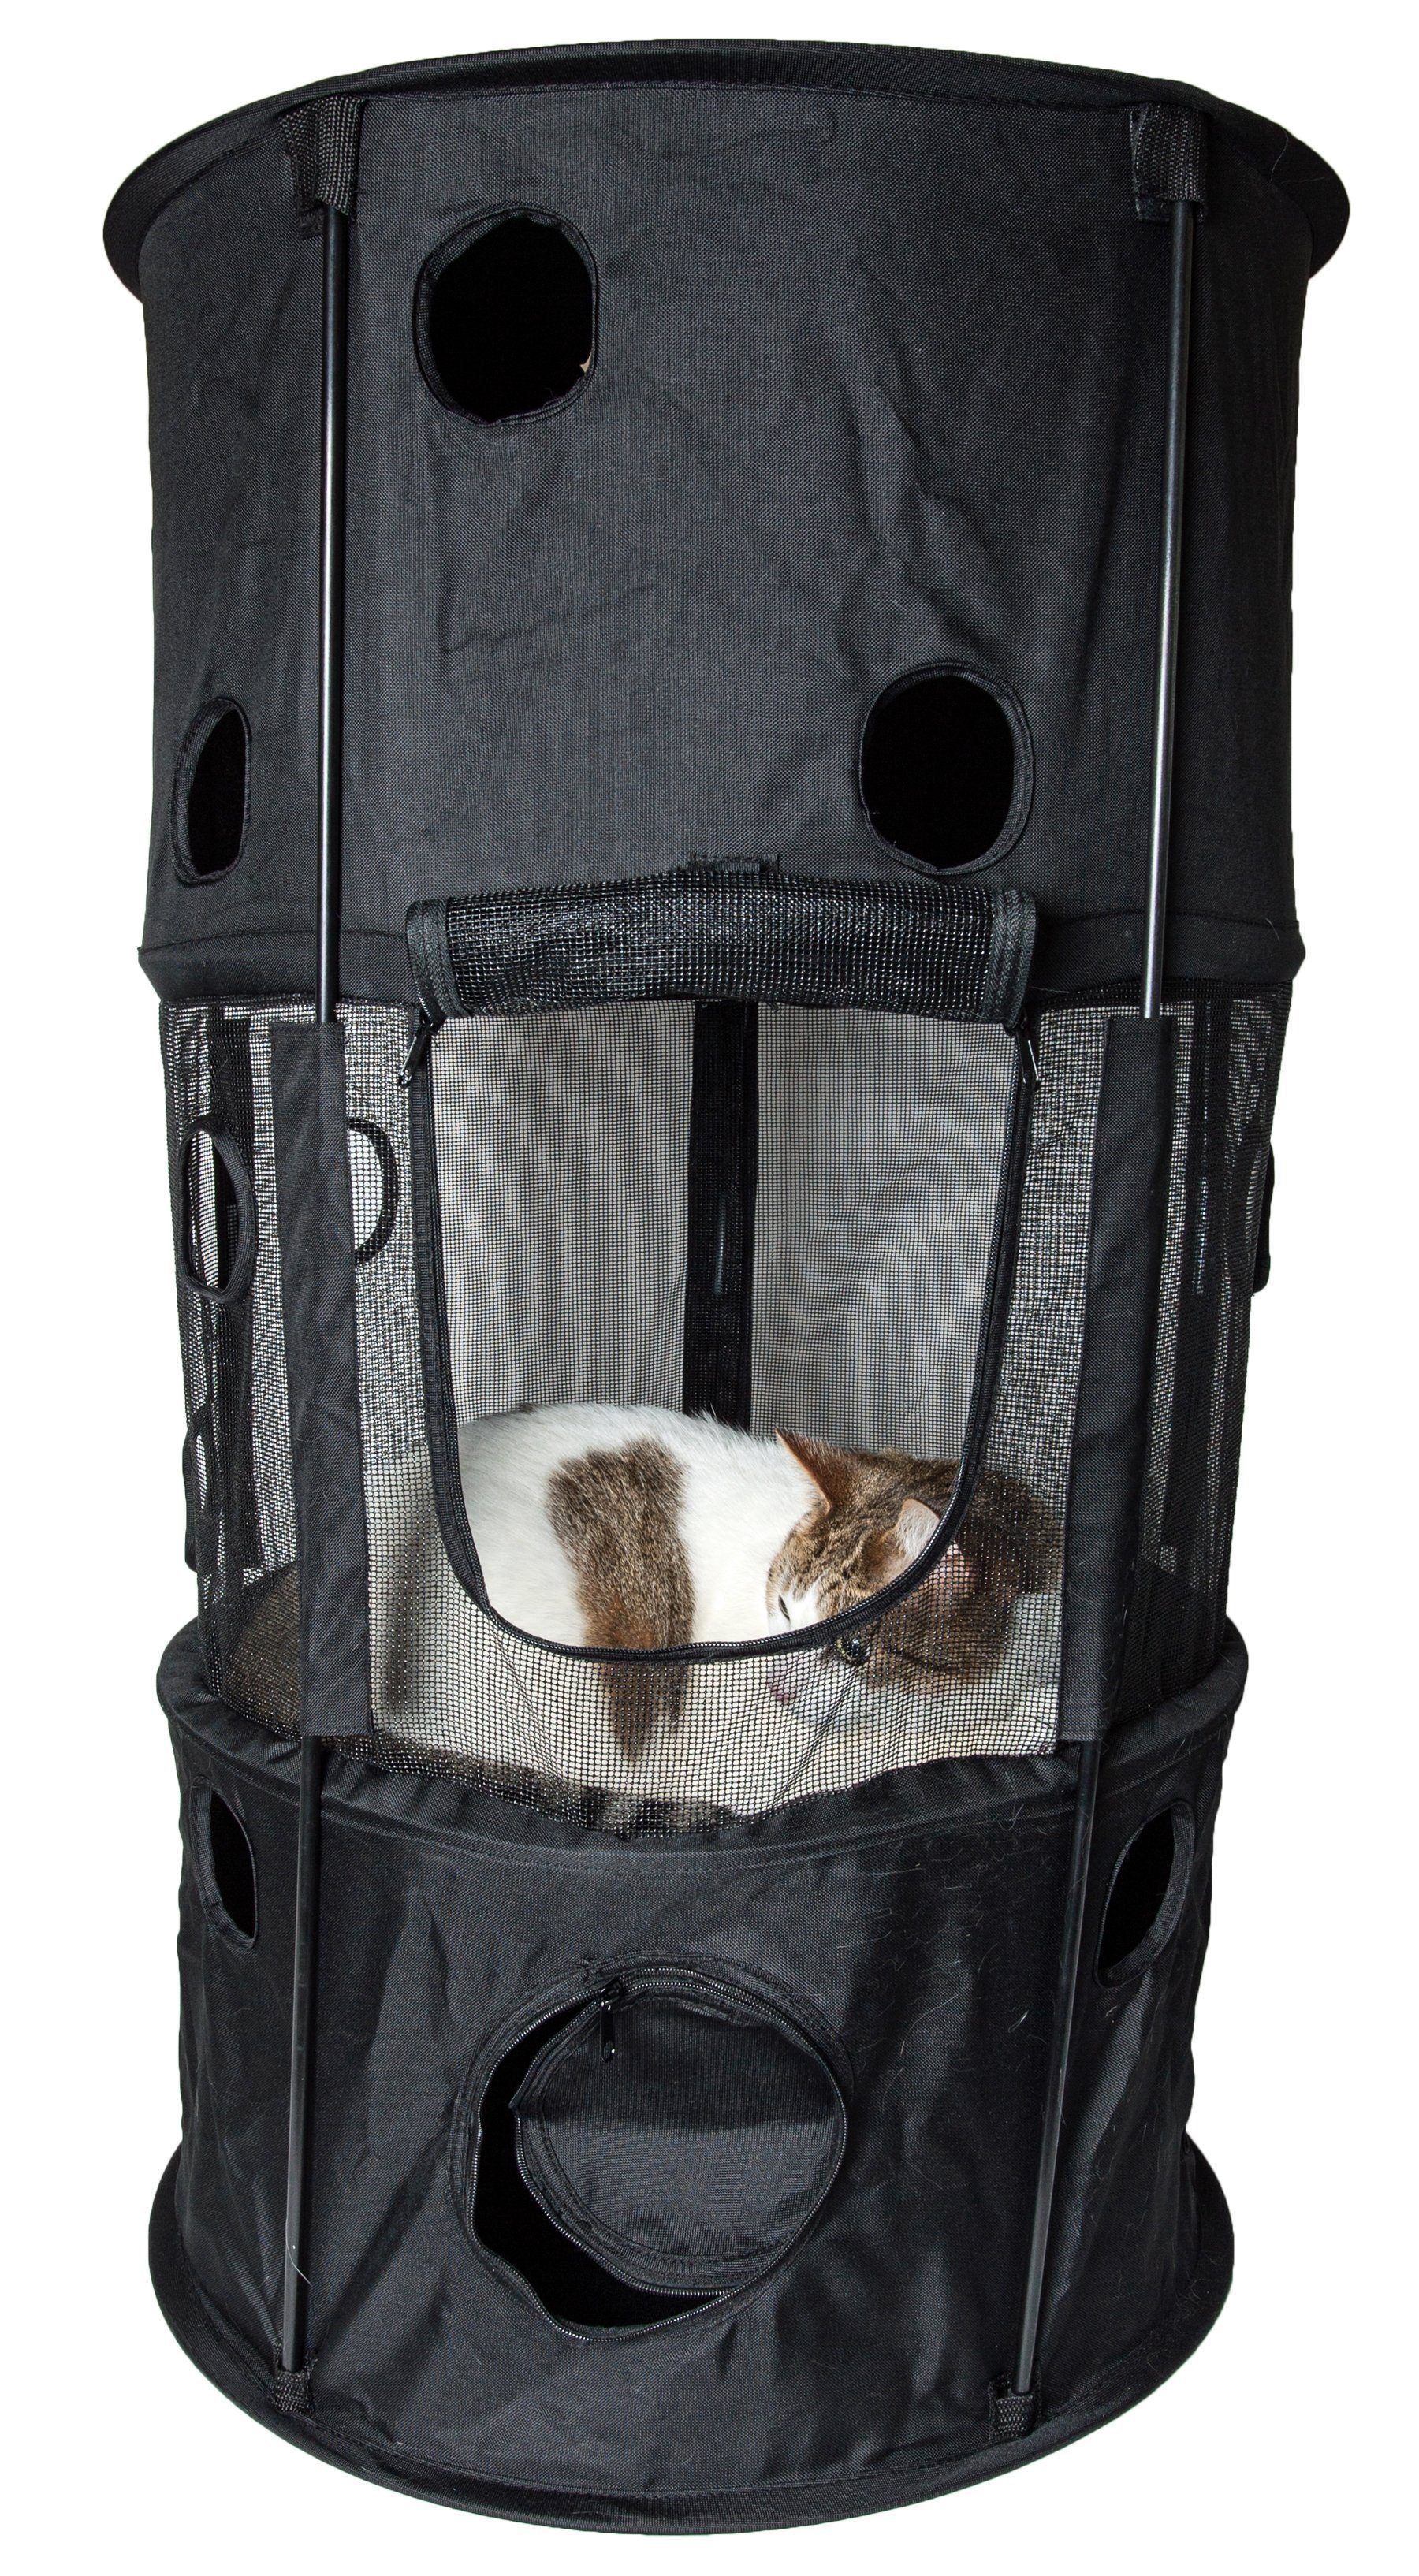 Pet Life ® 'Climber-Tree' Play-Active Travel Collapsible Lightweight Kitty Cat Tree House Lounger Black 